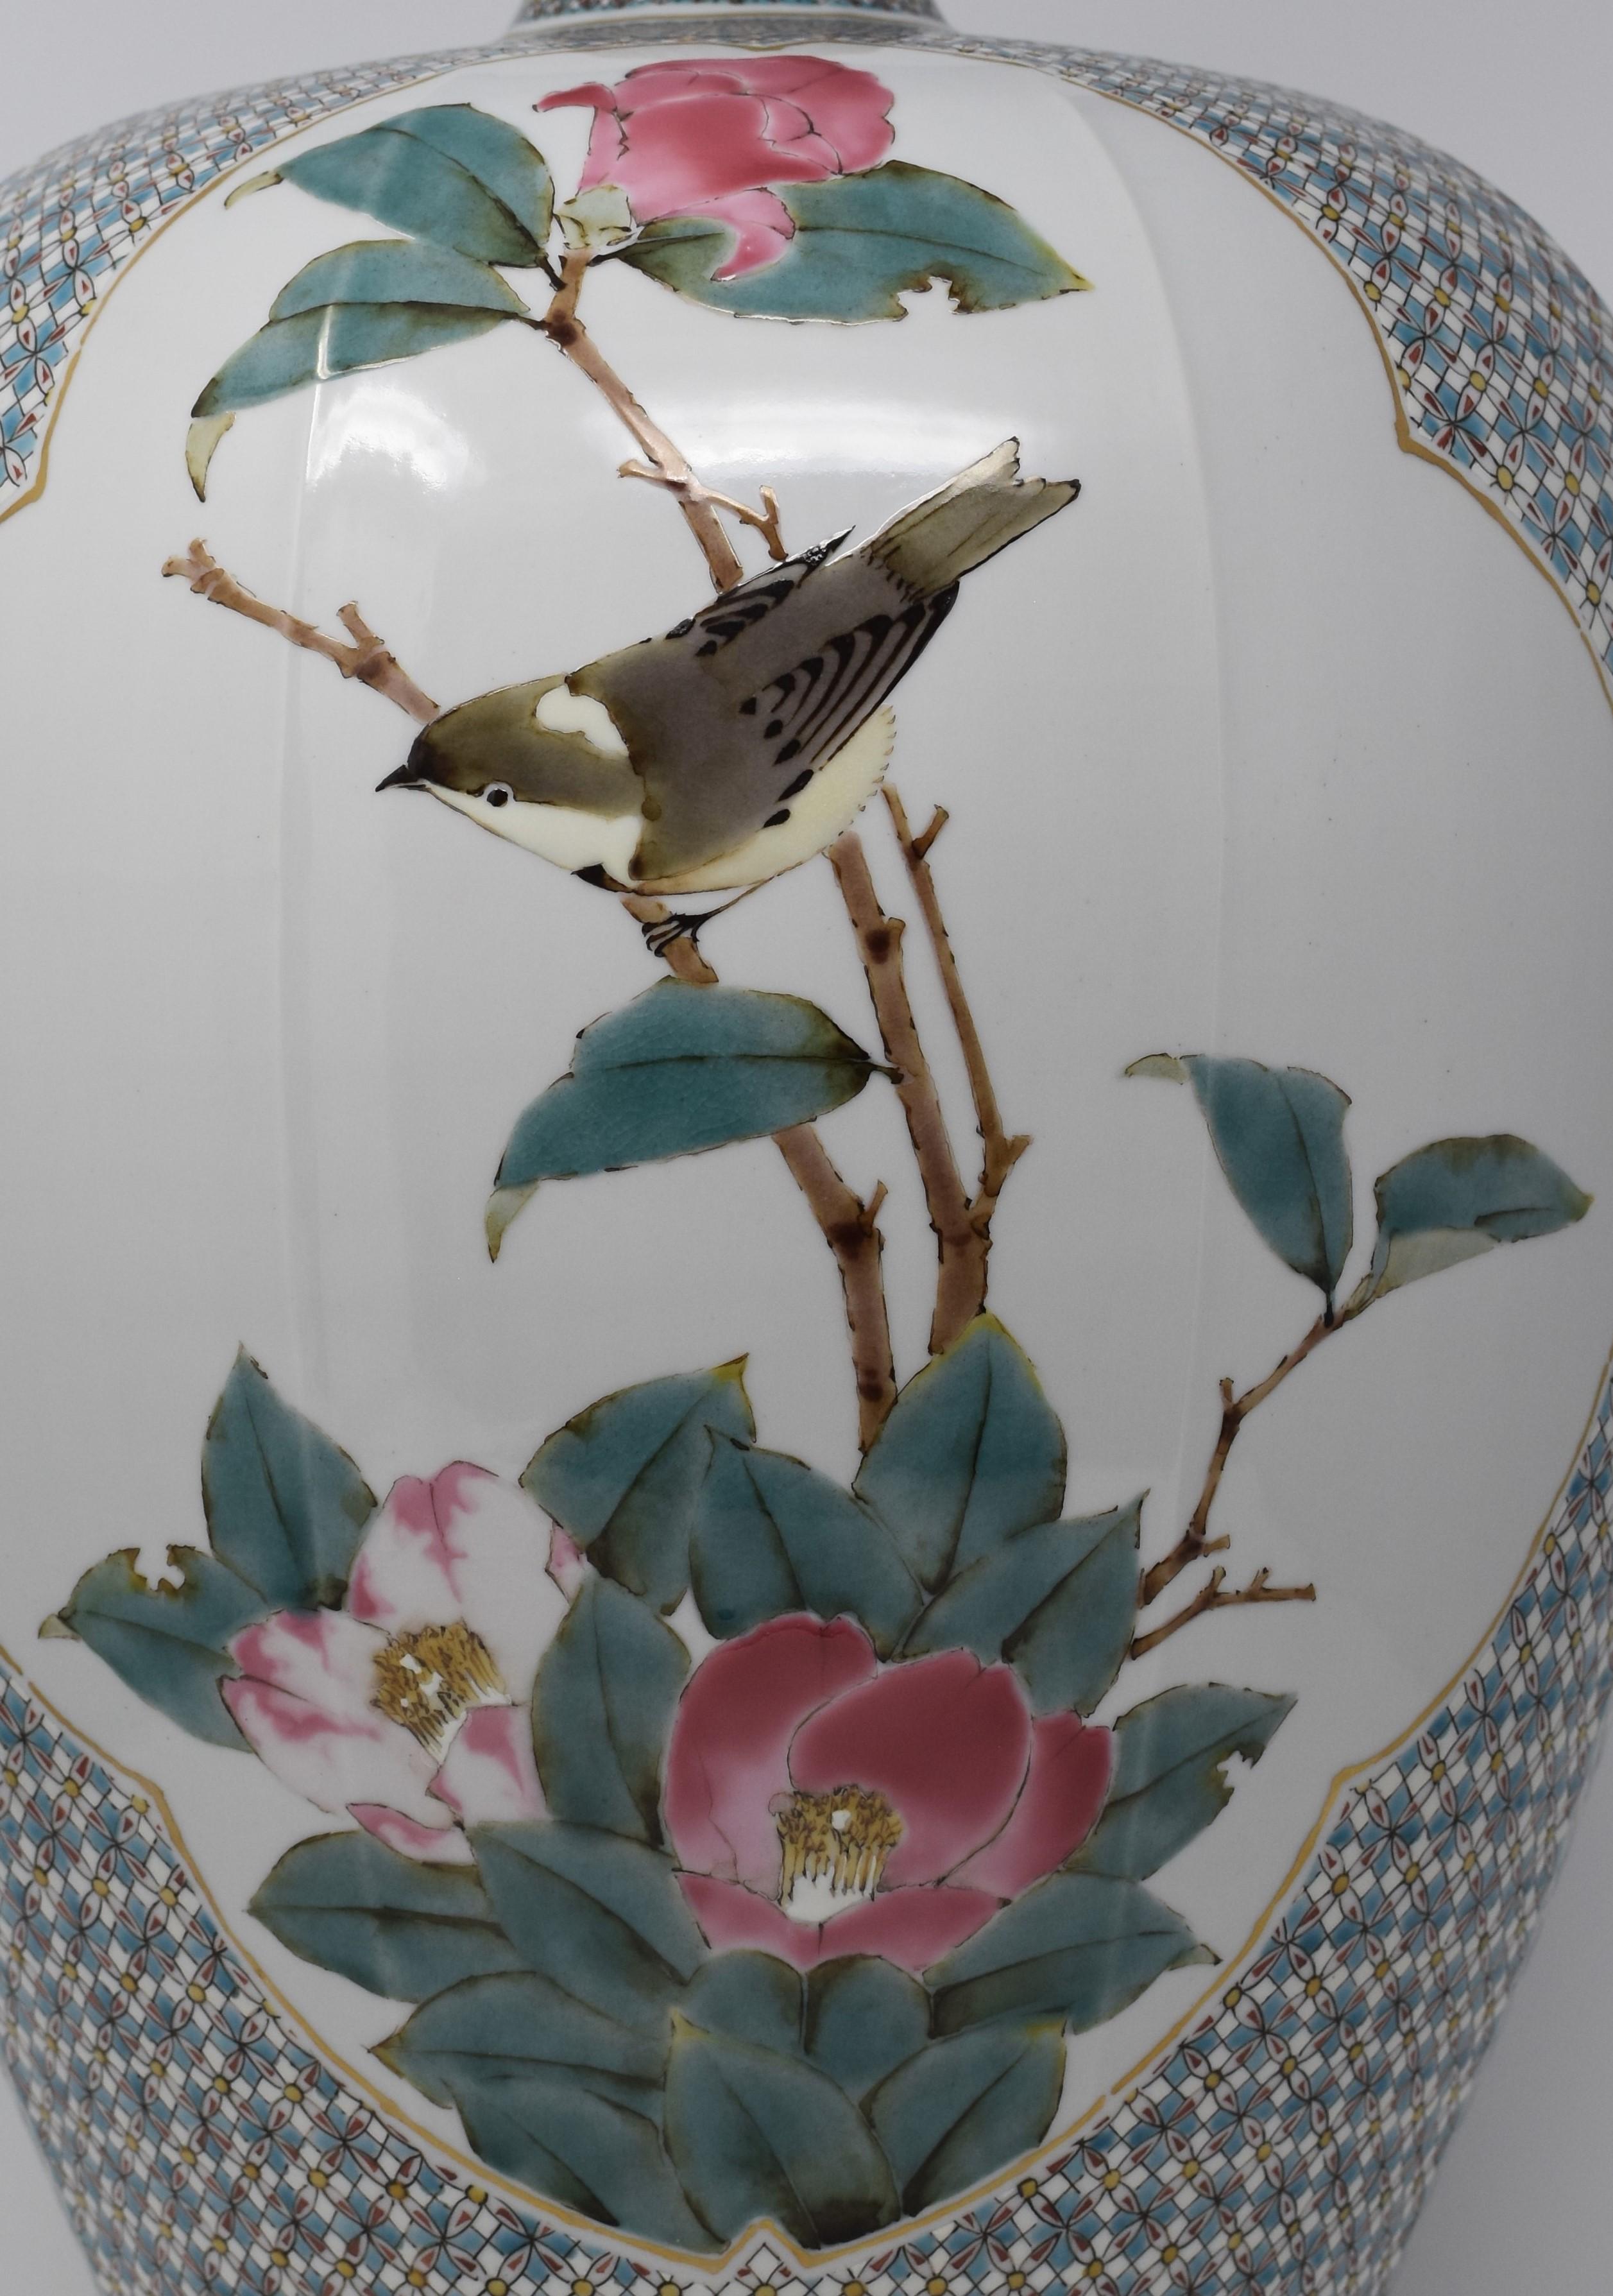 Outstanding Japanese.  cotemporary museum quality decorative porcelain vase, extremely intricately hand painted on a stunning baluster shape body, a signed masterpiece by highly celebrated and award-winning master porcelain artist from the historic